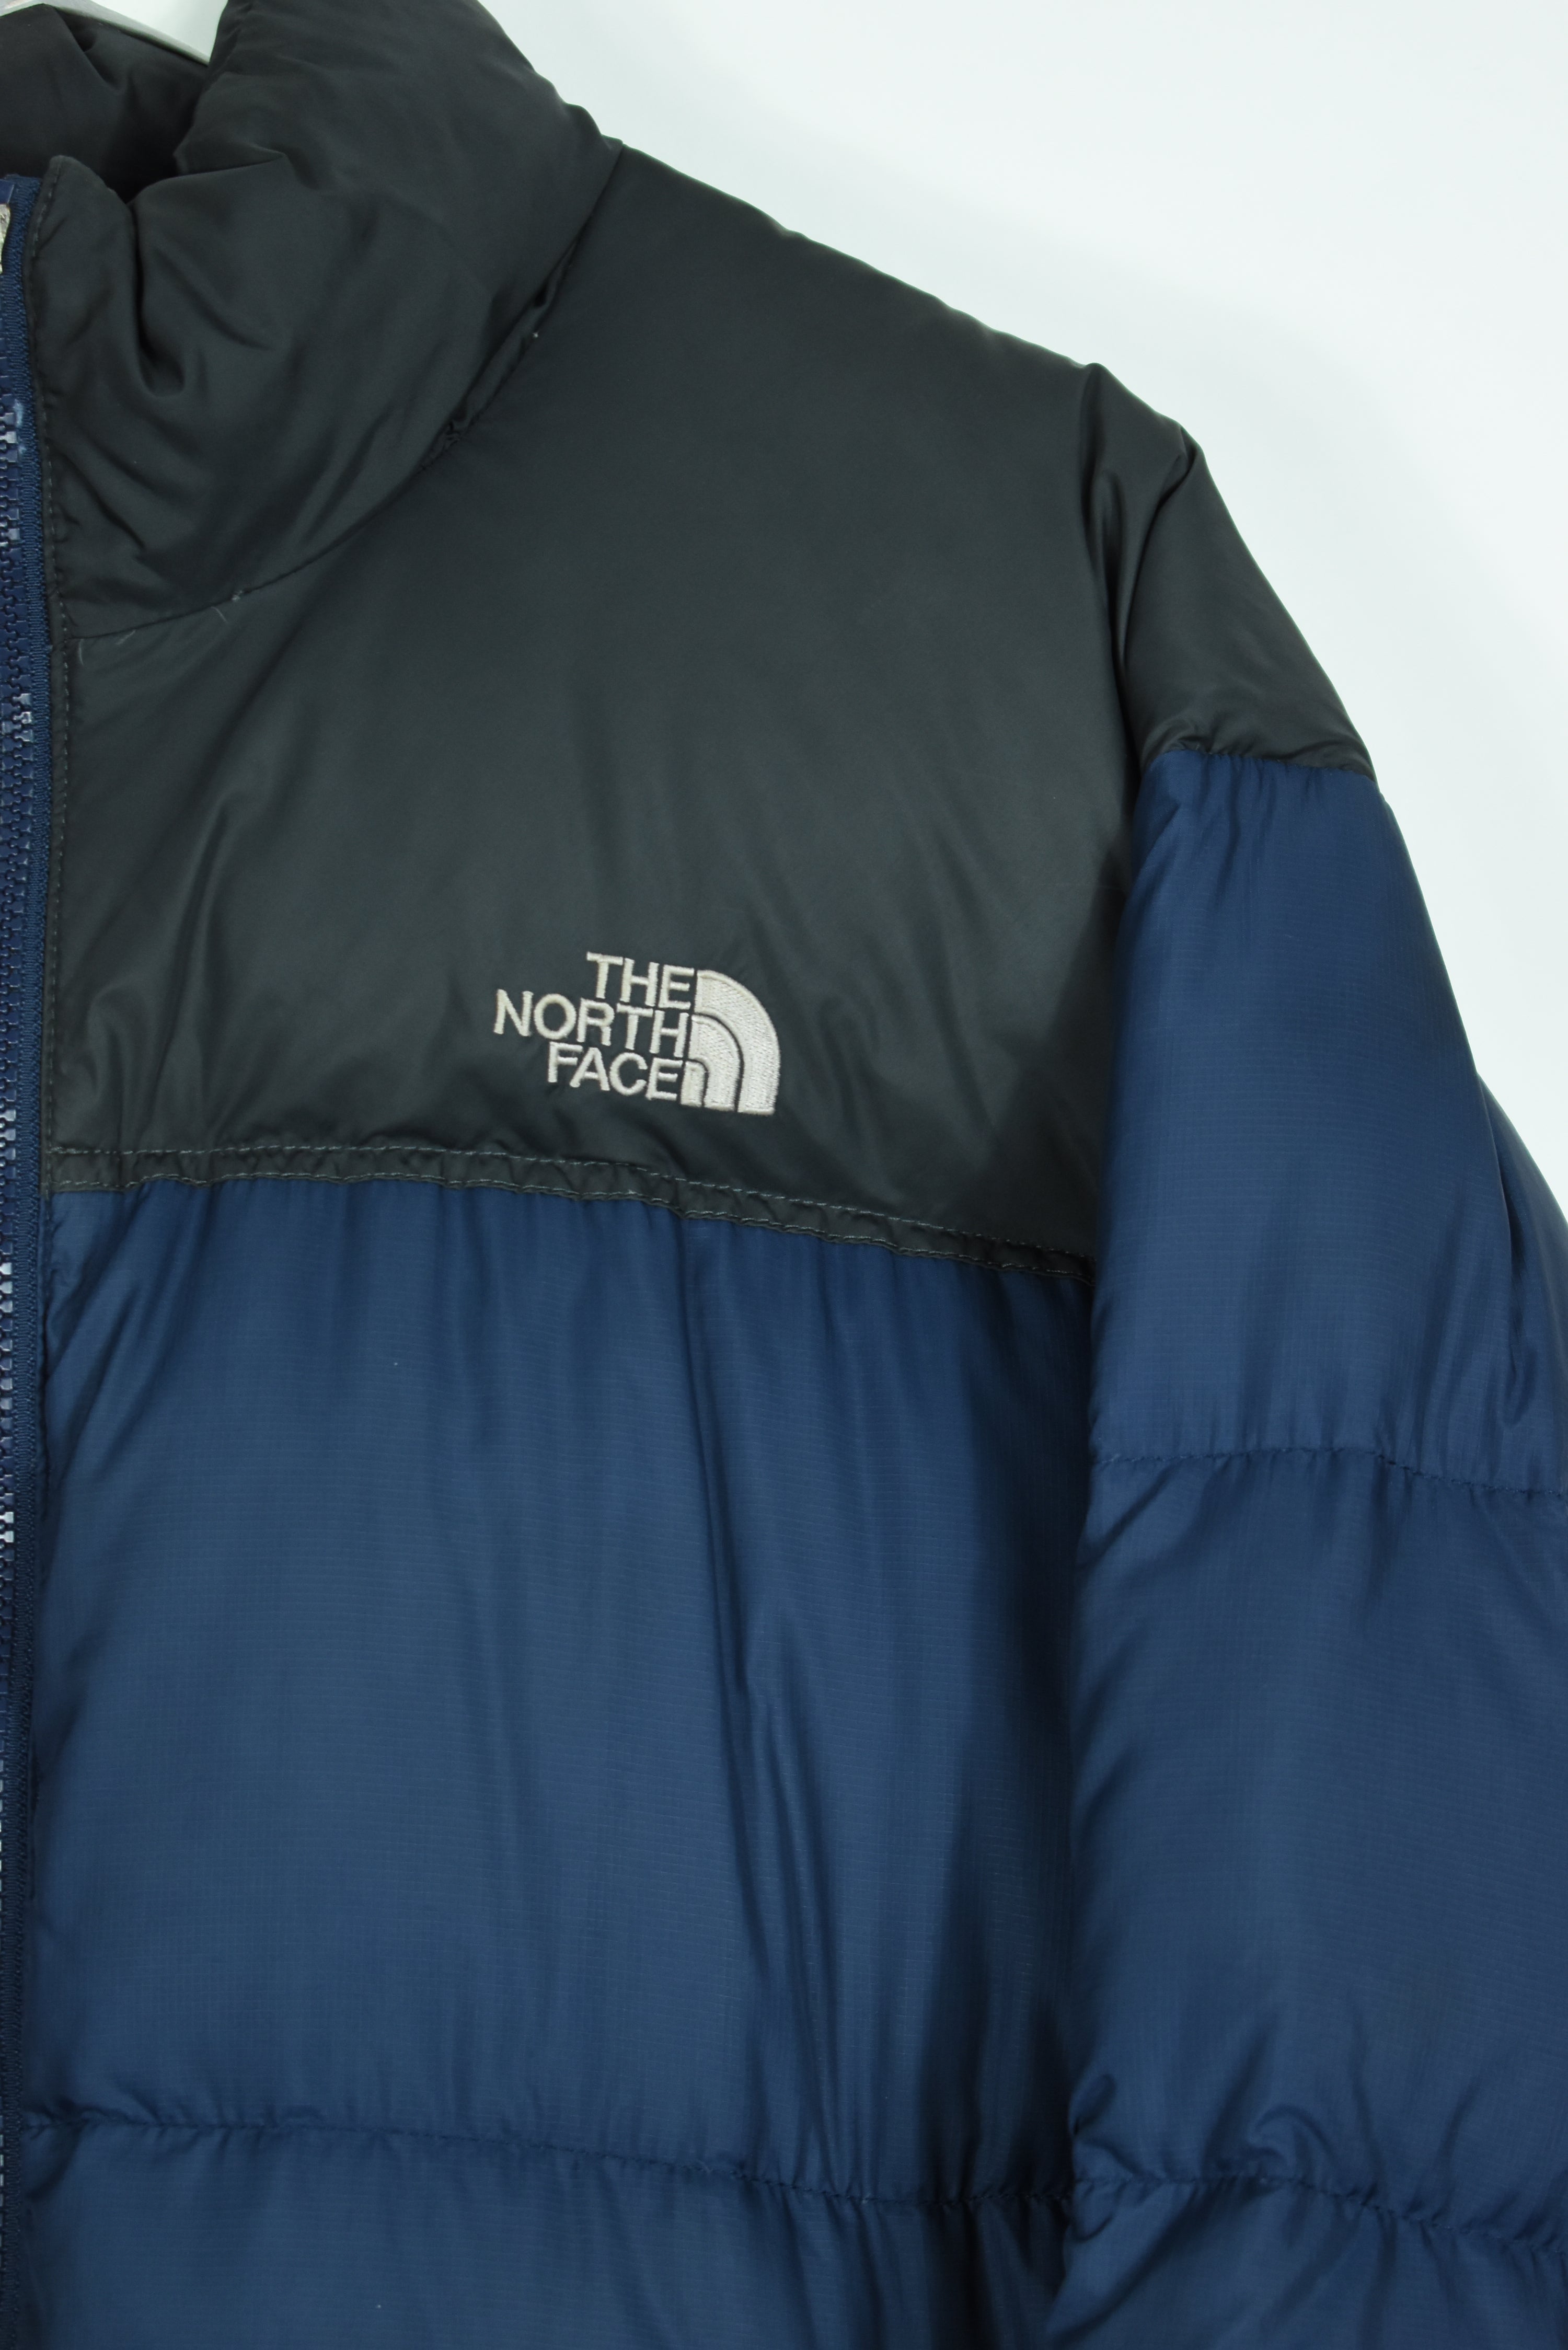 Vintage North Face Navy 700 Puffer LARGE (Baggy)